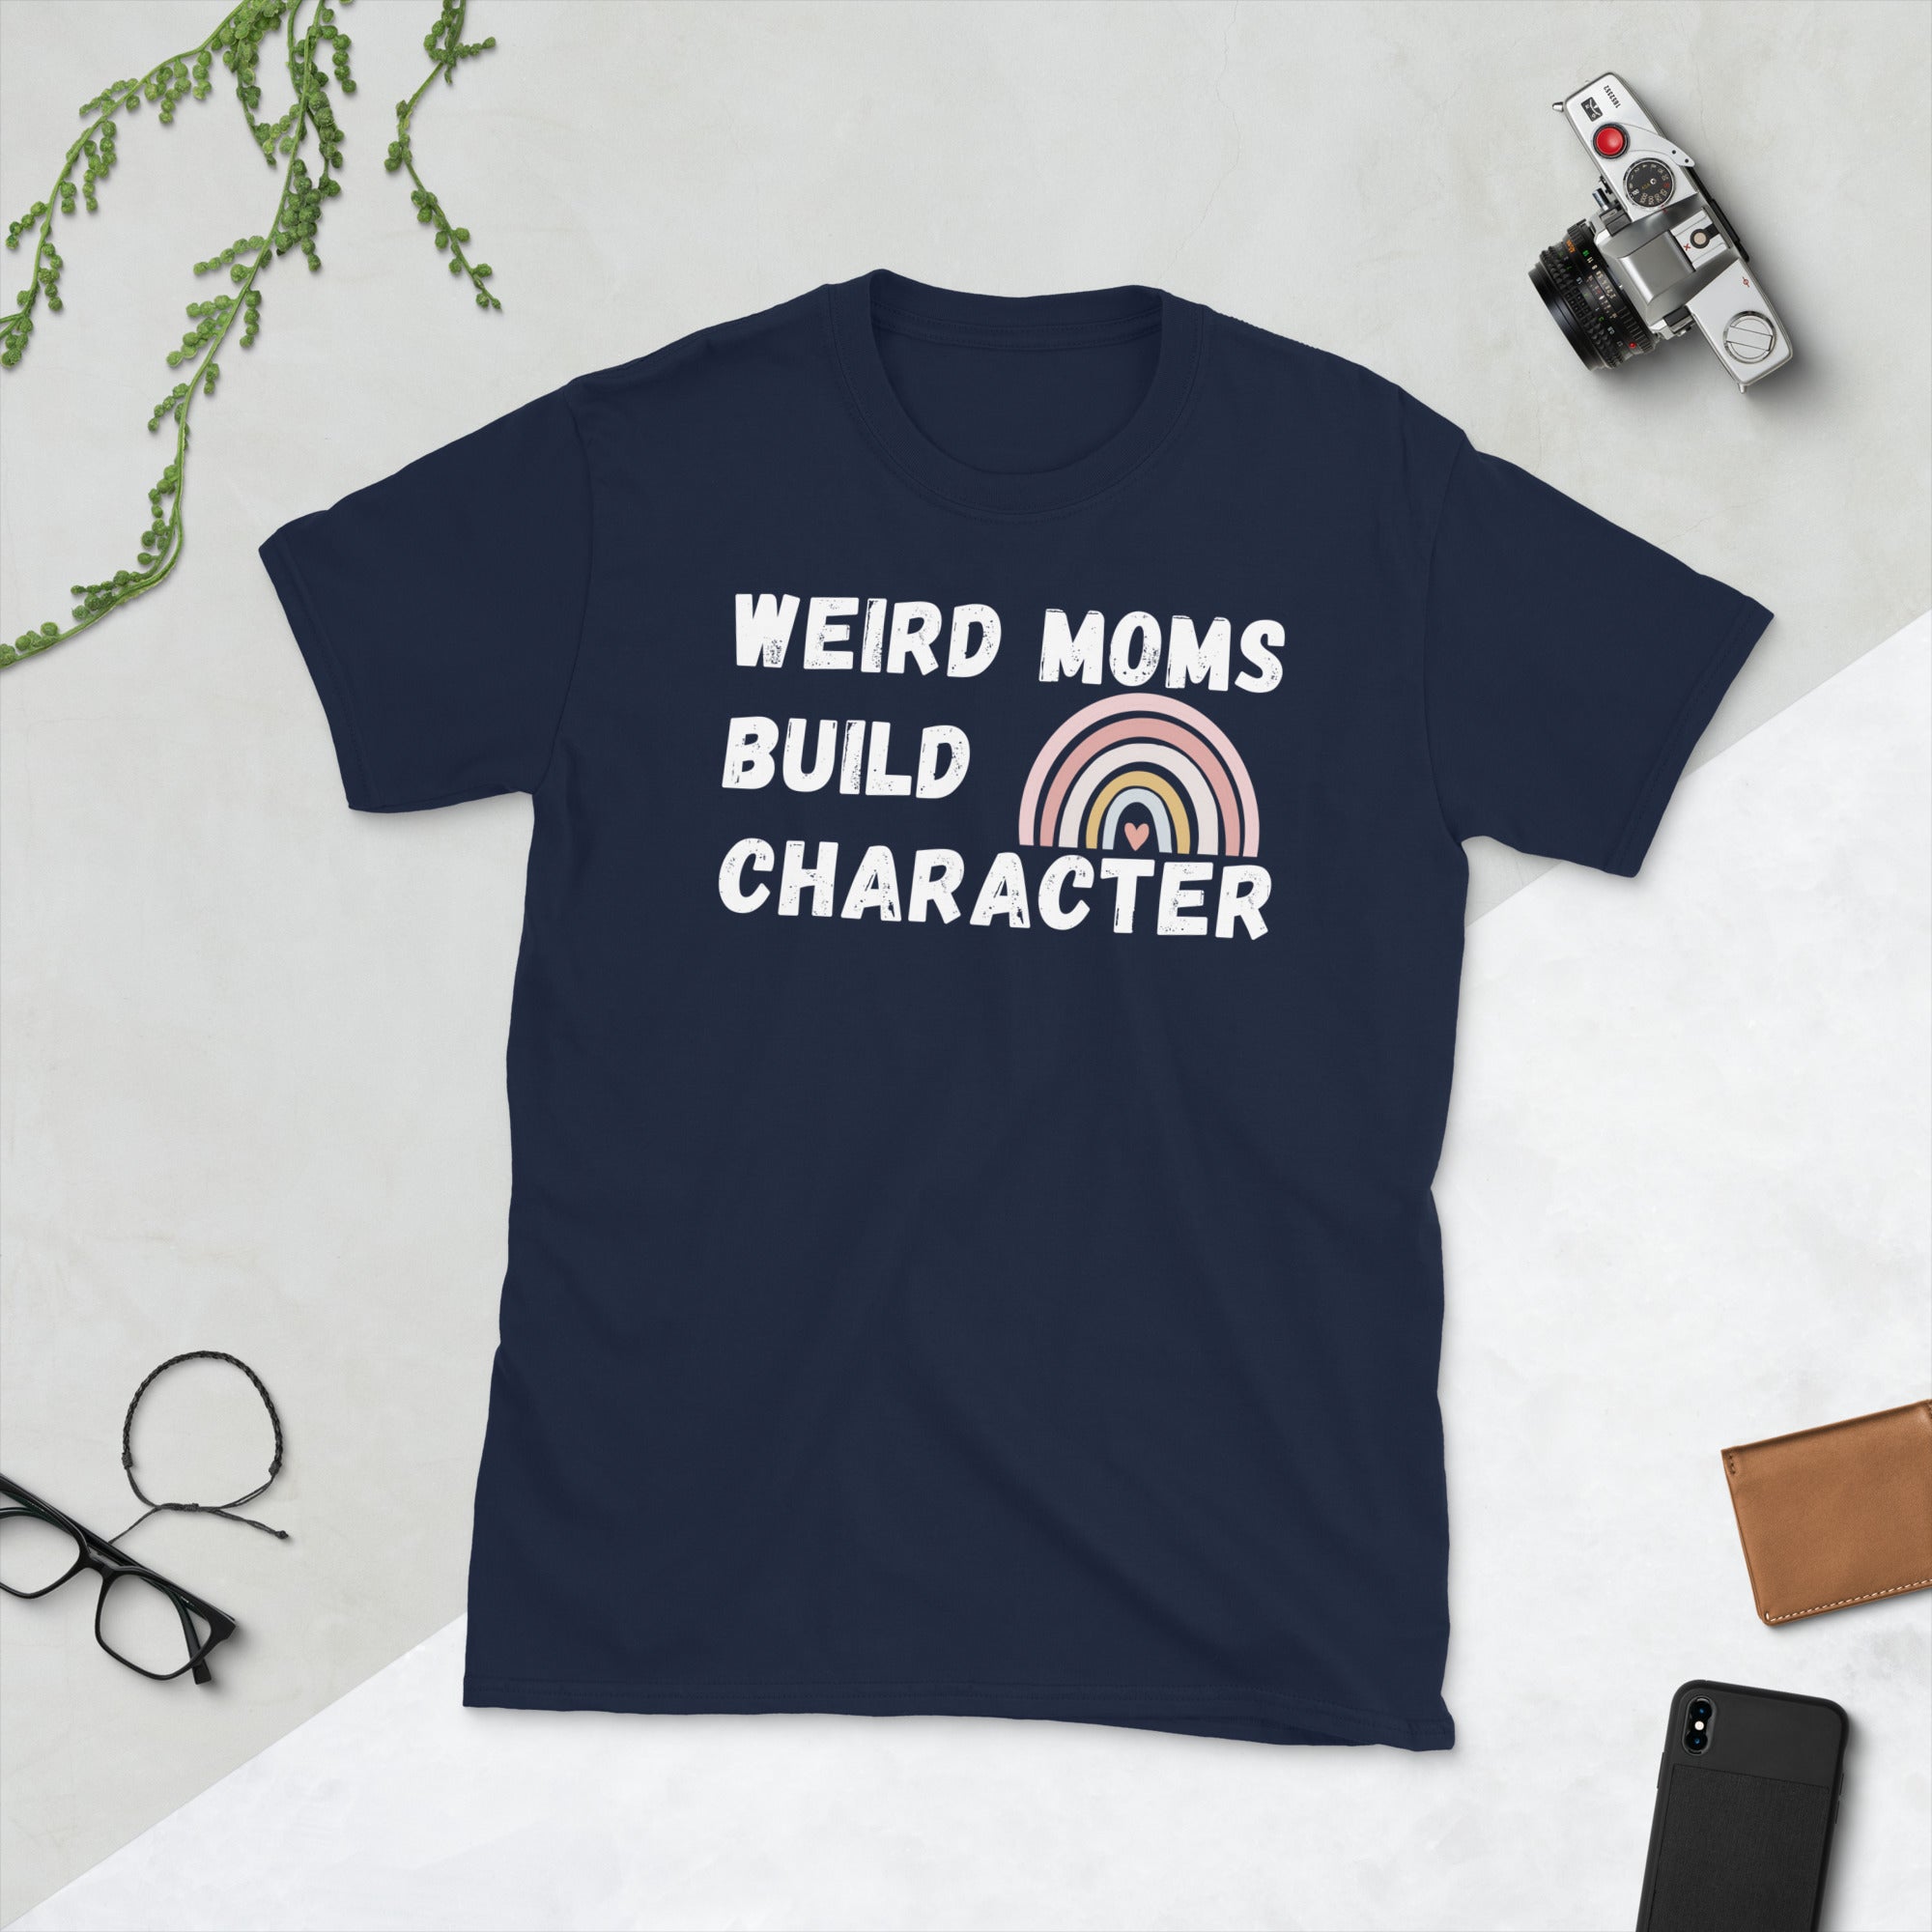 Weird Moms Build Character Shirt, Boho Rainbow Mom Shirt, Funny Mothers Day Gifts, Funny Mom Shirt, Weird Mom Shirt, Awkward Mom Cute TShirt